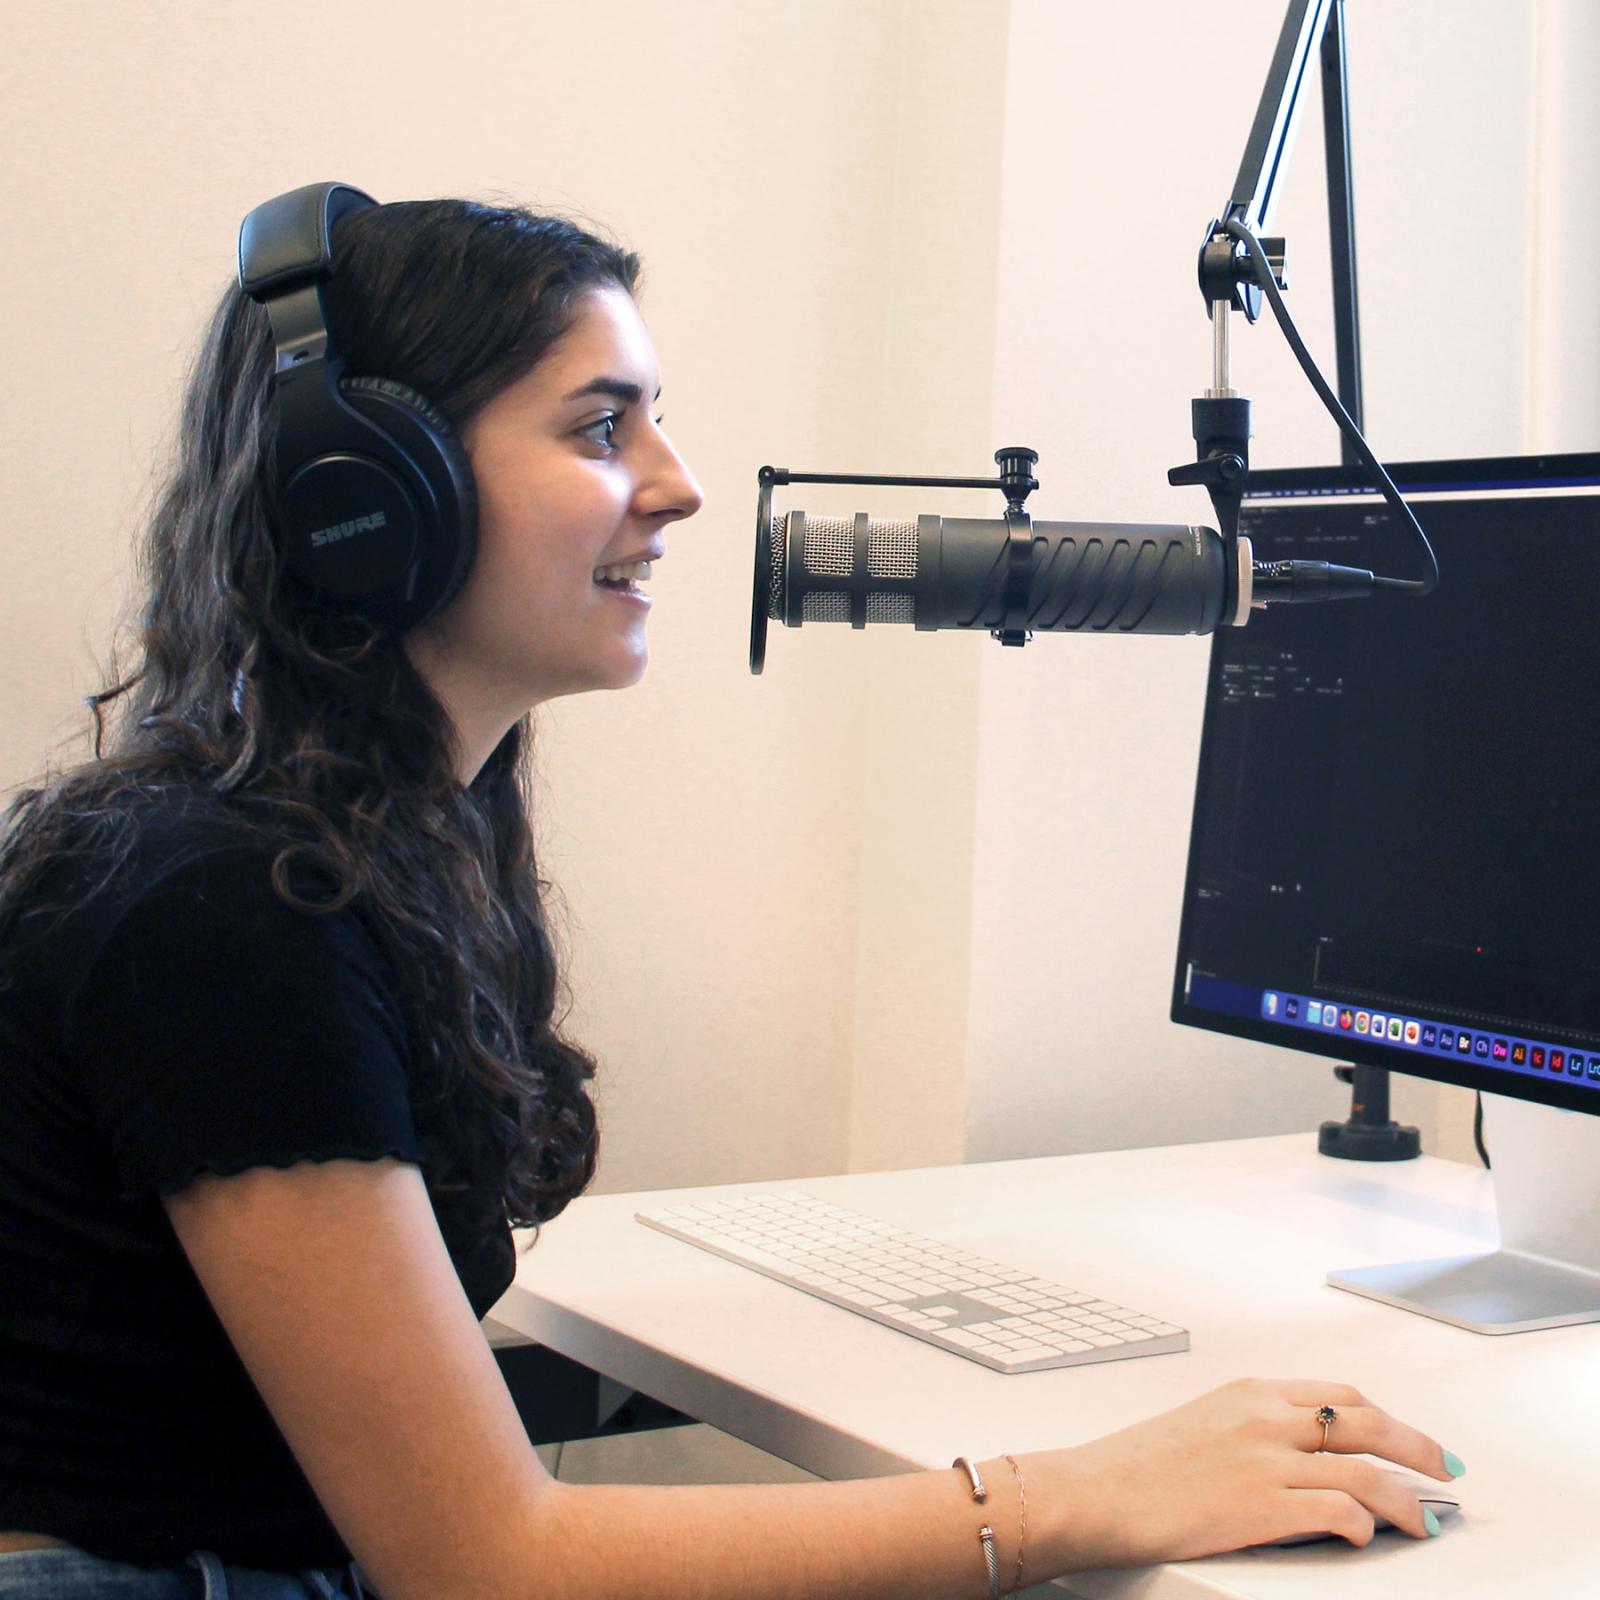 Pace University Communication and Media Studies female student at computer with a microphone recording audio